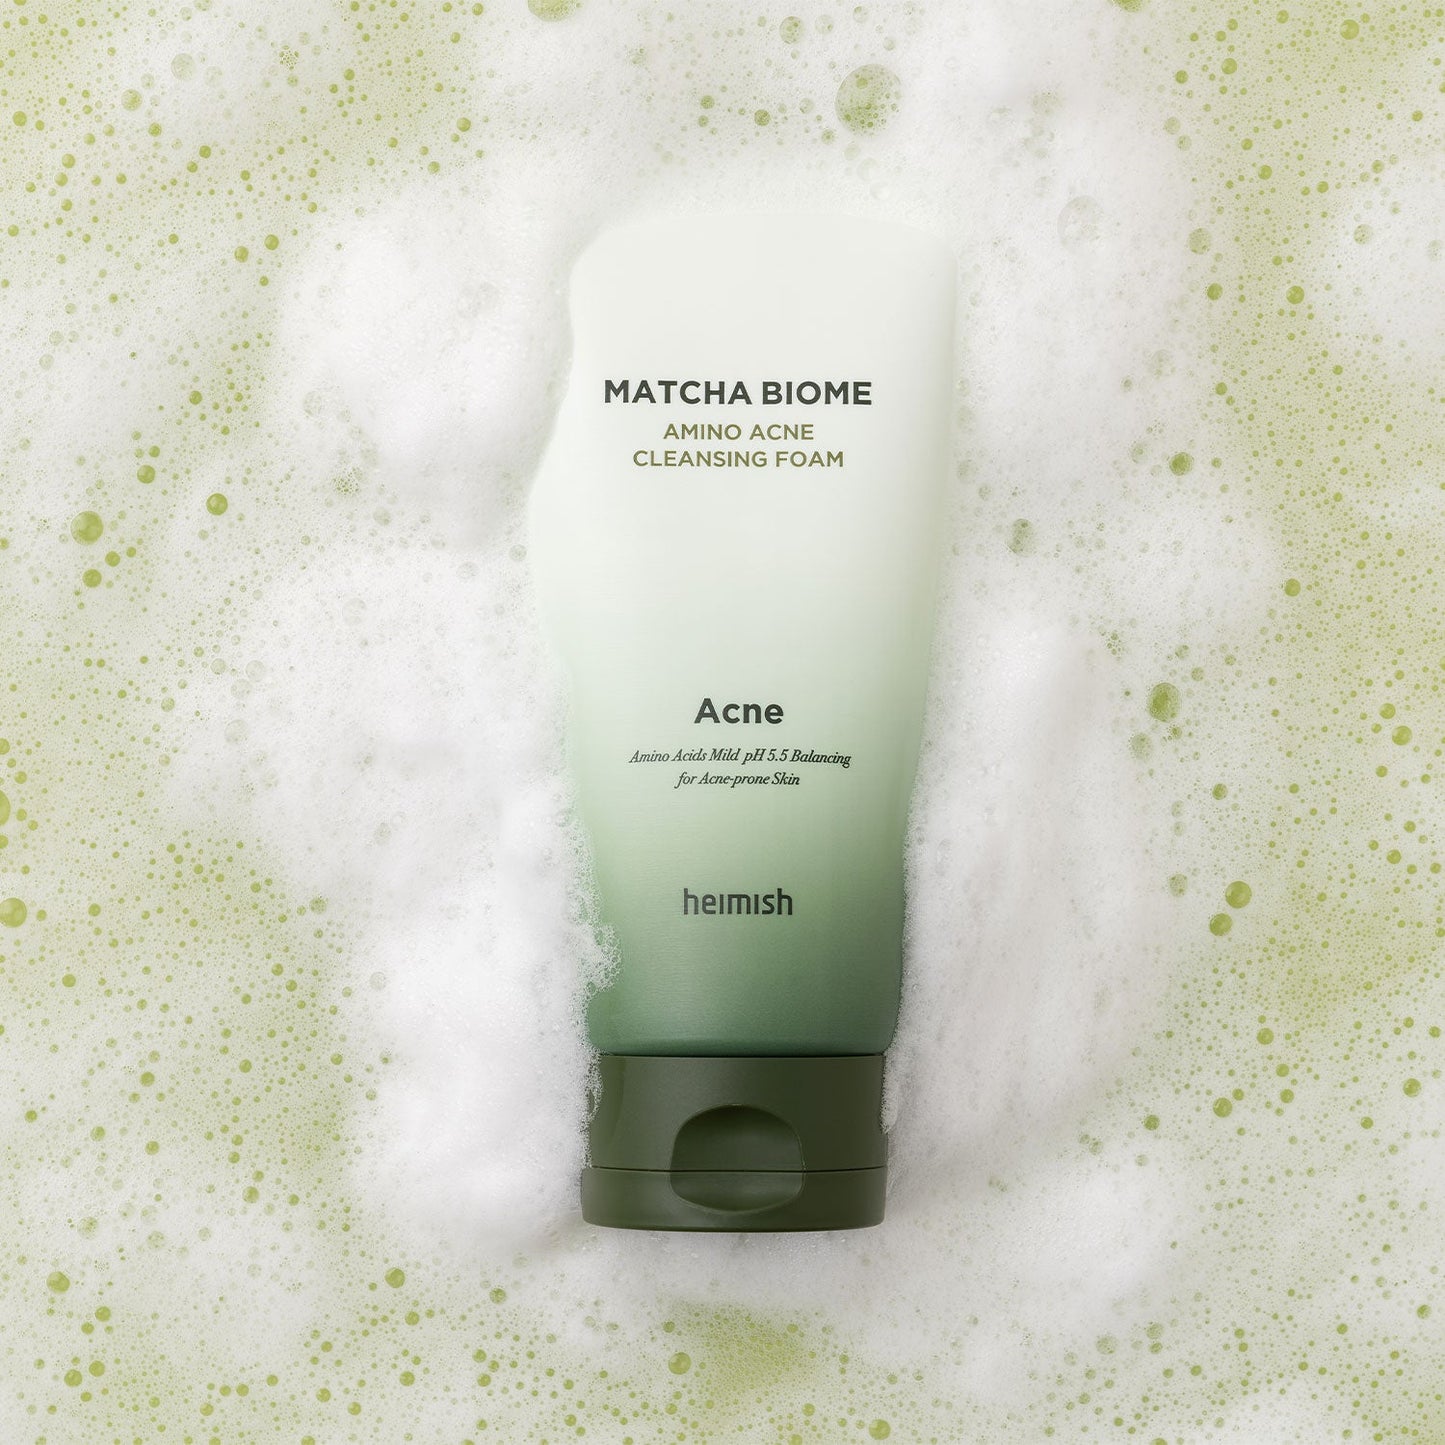 Matcha biome amino Acne cleansing foam by Heimish